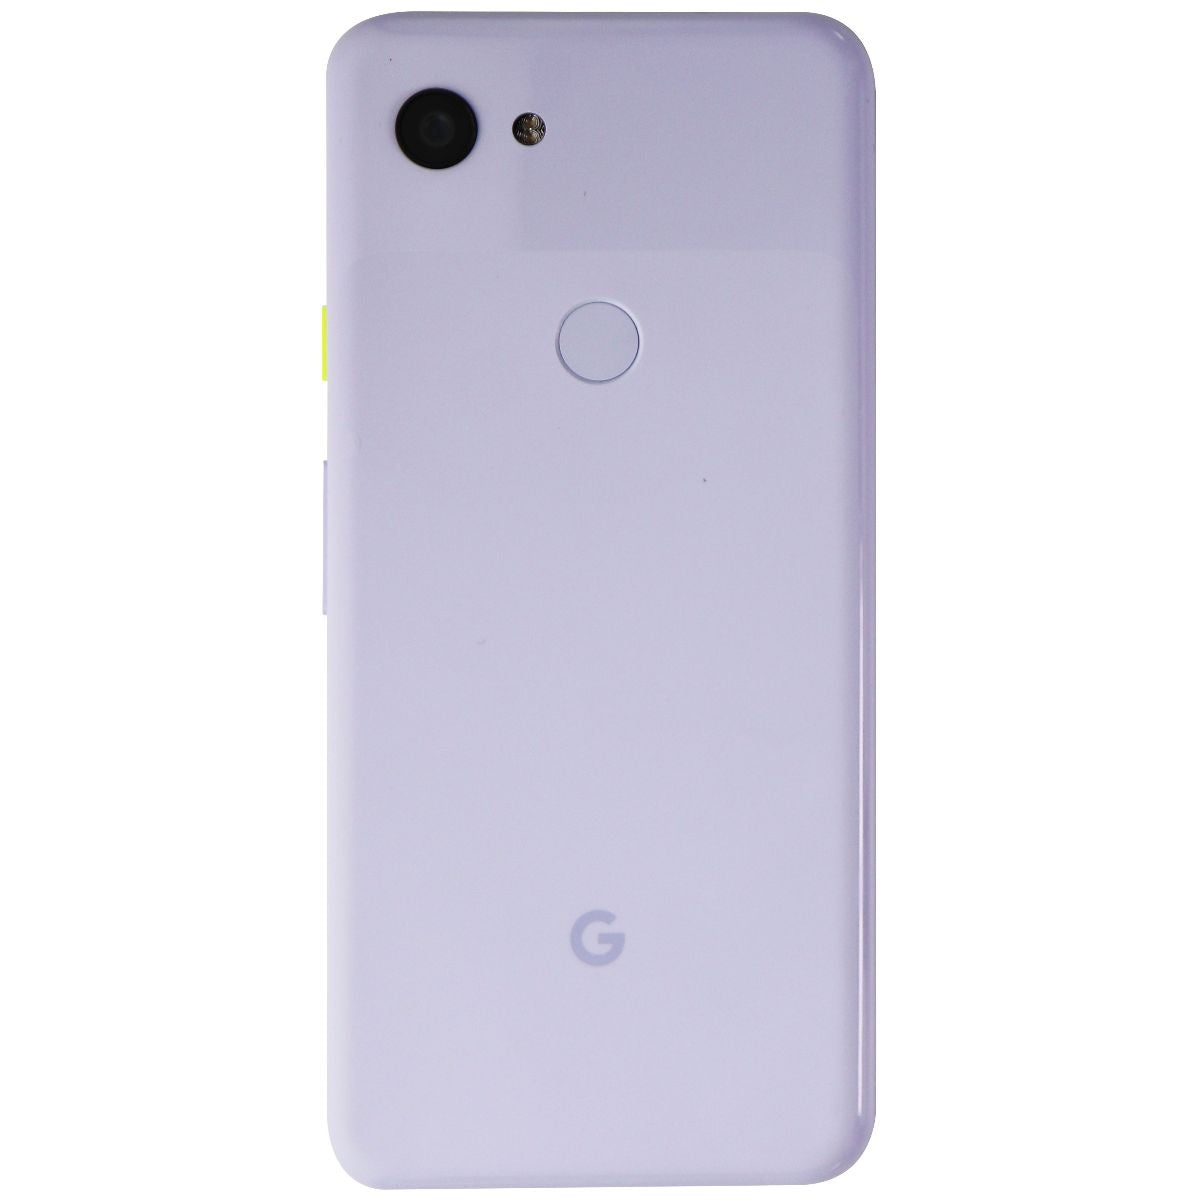 Google Pixel 3a (5.6-inch) Smartphone (G020G) Unlocked - 64GB / Purple-ish Cell Phones & Smartphones Google    - Simple Cell Bulk Wholesale Pricing - USA Seller